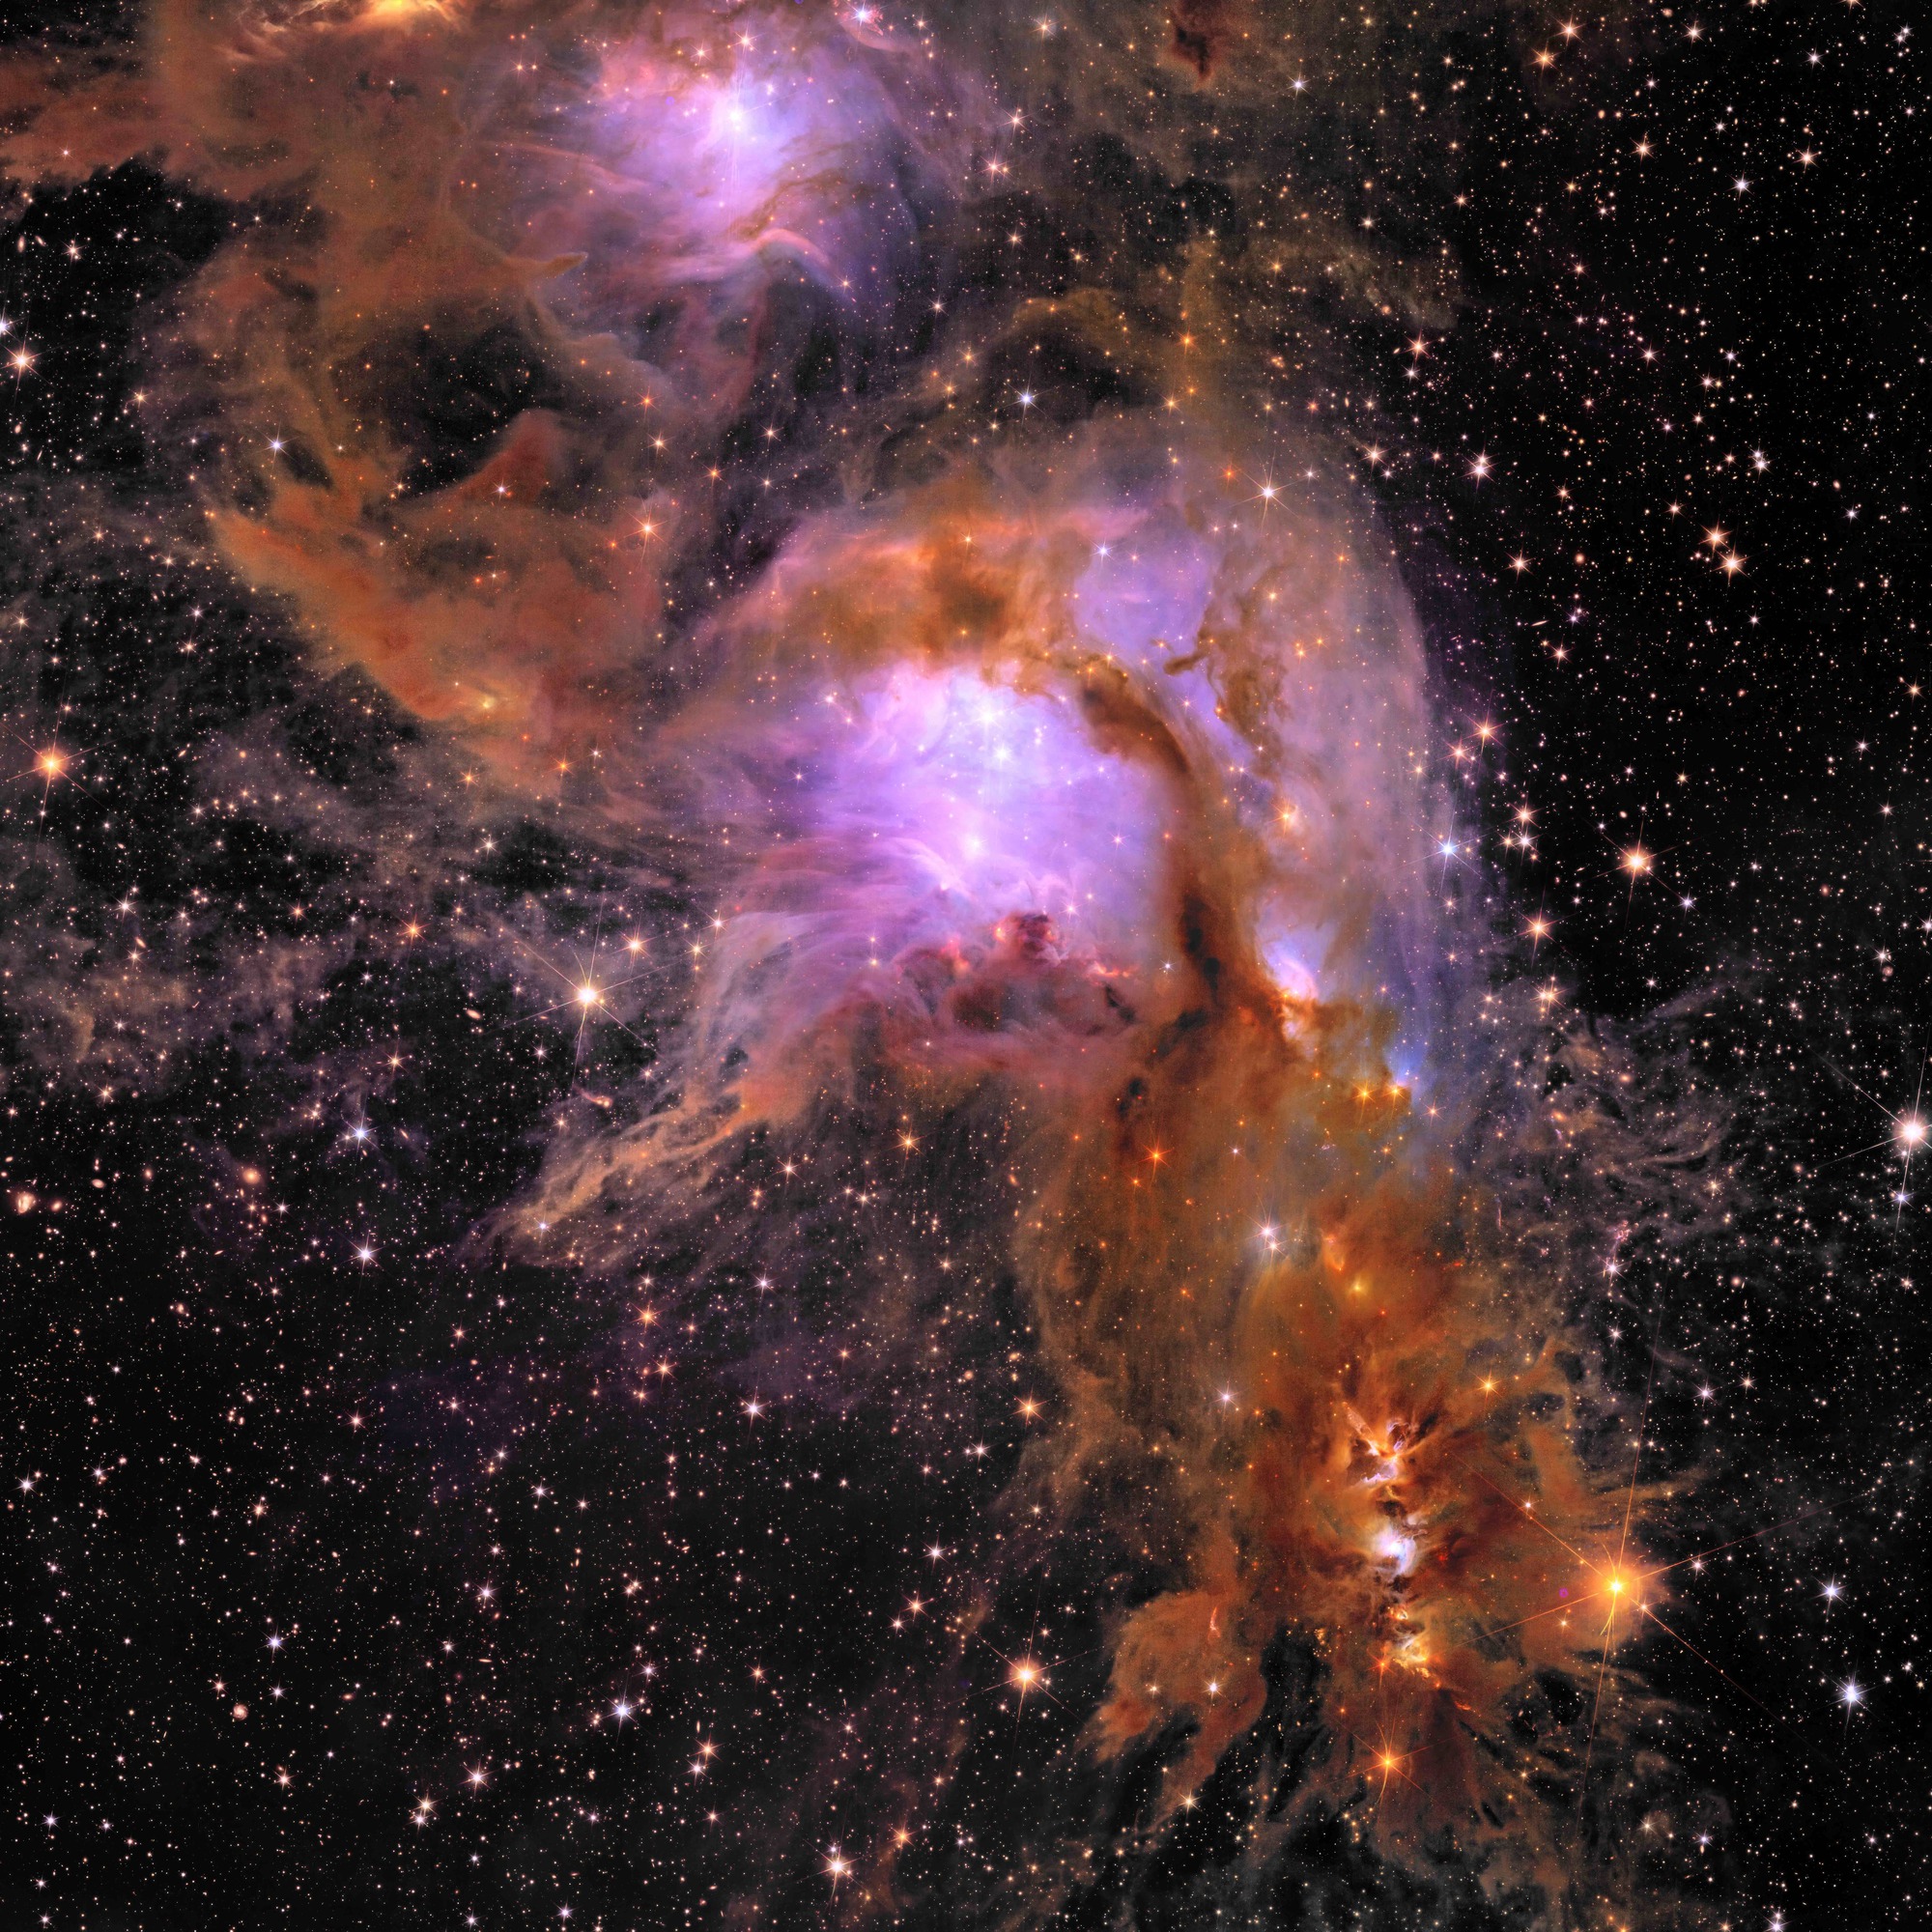 This image is released as part of the Early Release Observations from ESA’s Euclid space mission. All data from these initial observations are made public on 23 May 2024 – including a handful of unprecedented new views of the nearby Universe, this being one. This breathtaking image features Messier 78 (the central and brightest region), a vibrant nursery of star formation enveloped in a shroud of interstellar dust. This image is unprecedented – it is the first shot of this young star-forming region at this width and depth.